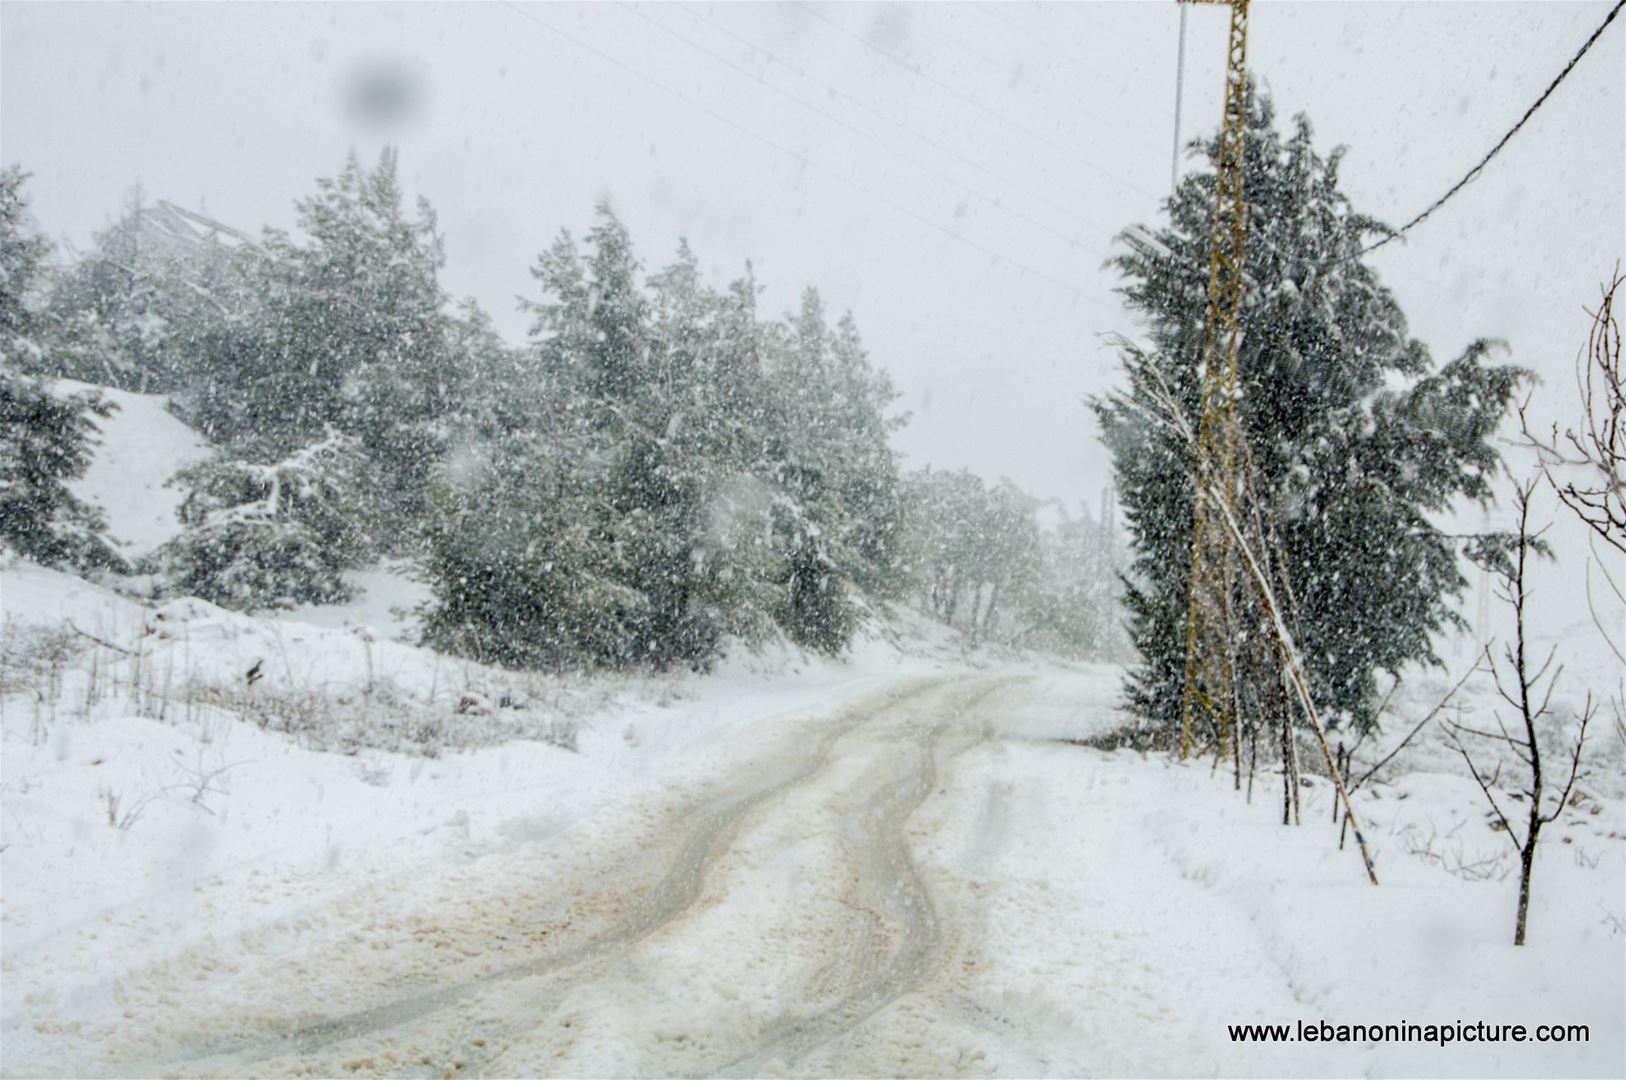 Trees and Roads Covered by Snow (Wata Joz, Lebanon)